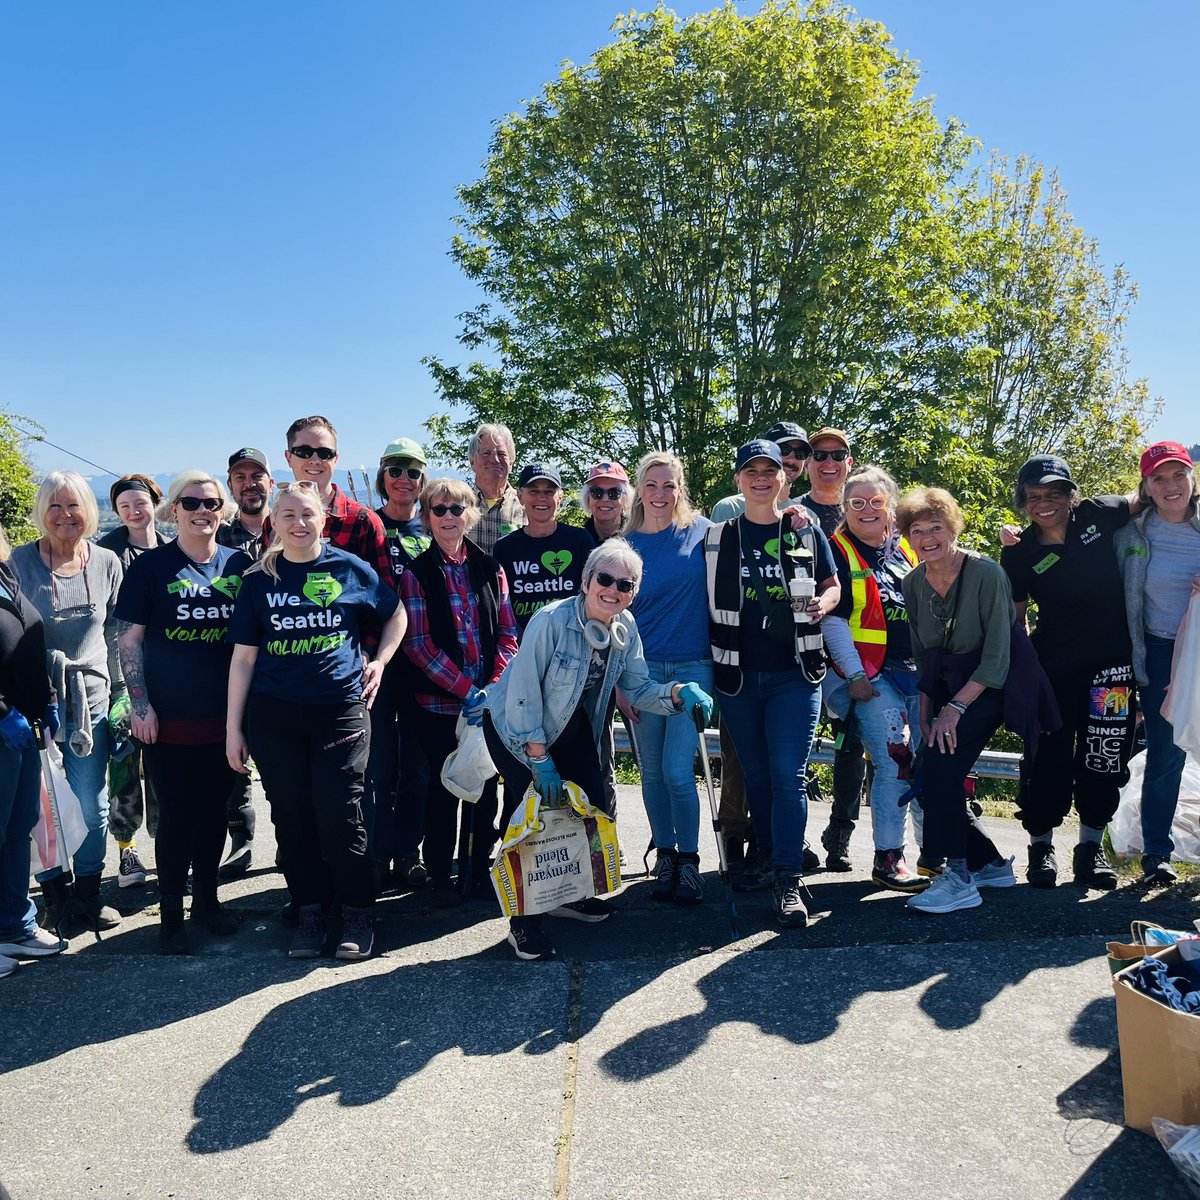 Join thousands of Seattleites on Saturday, May 18 as we unite as #OneSeattle to give back and take action for the #DayOfService. We're partnering with business, civic, and nonprofit groups as well as Seattle's sports teams for over 110 service events! Pick event #21 ! Register